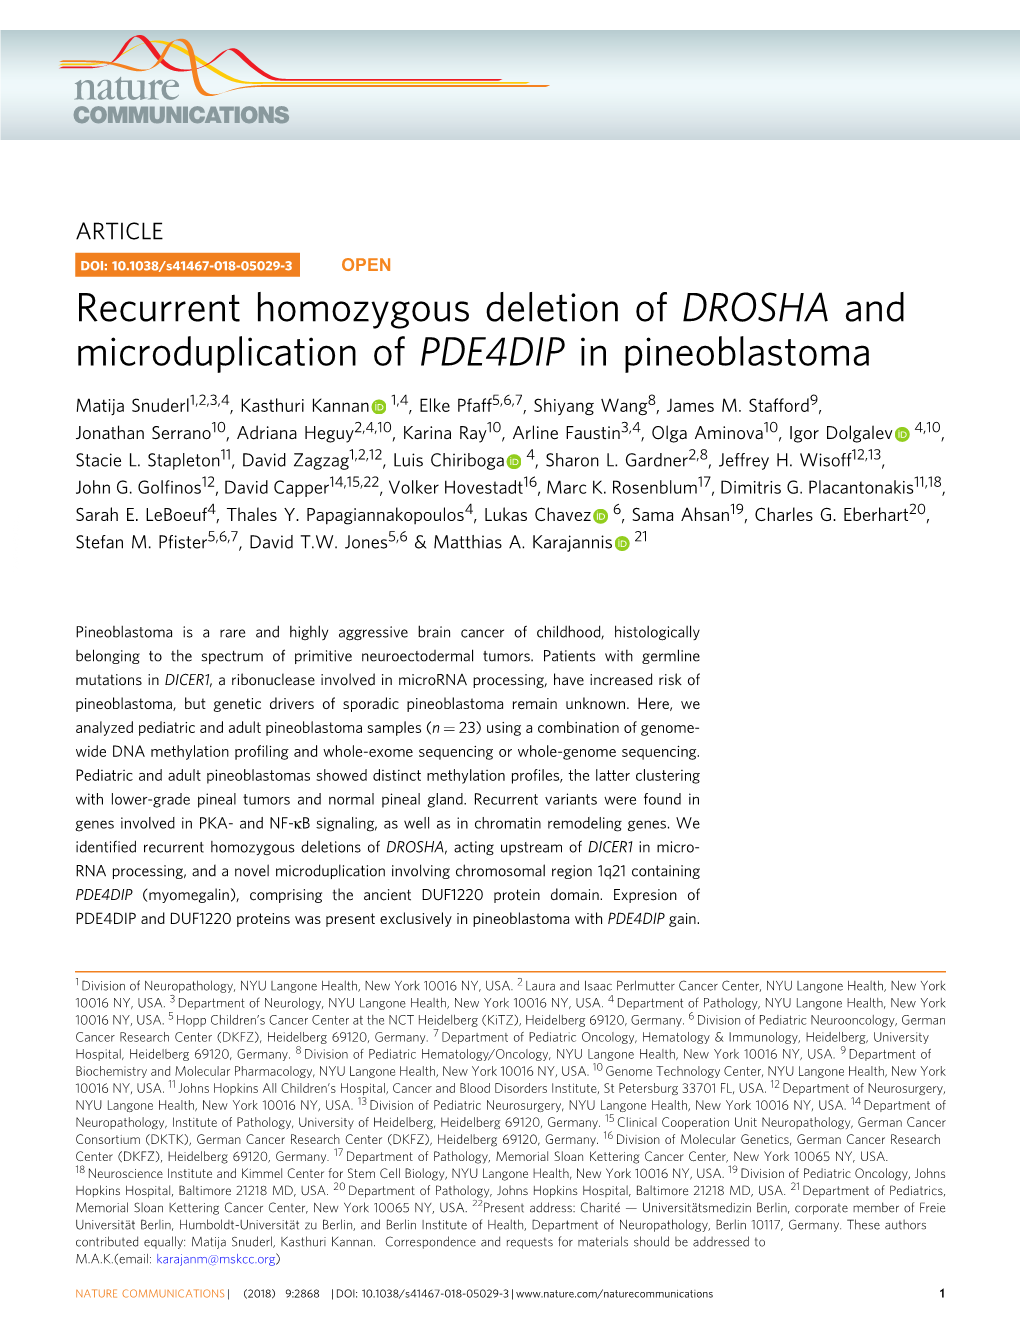 Recurrent Homozygous Deletion of DROSHA and Microduplication of PDE4DIP in Pineoblastoma